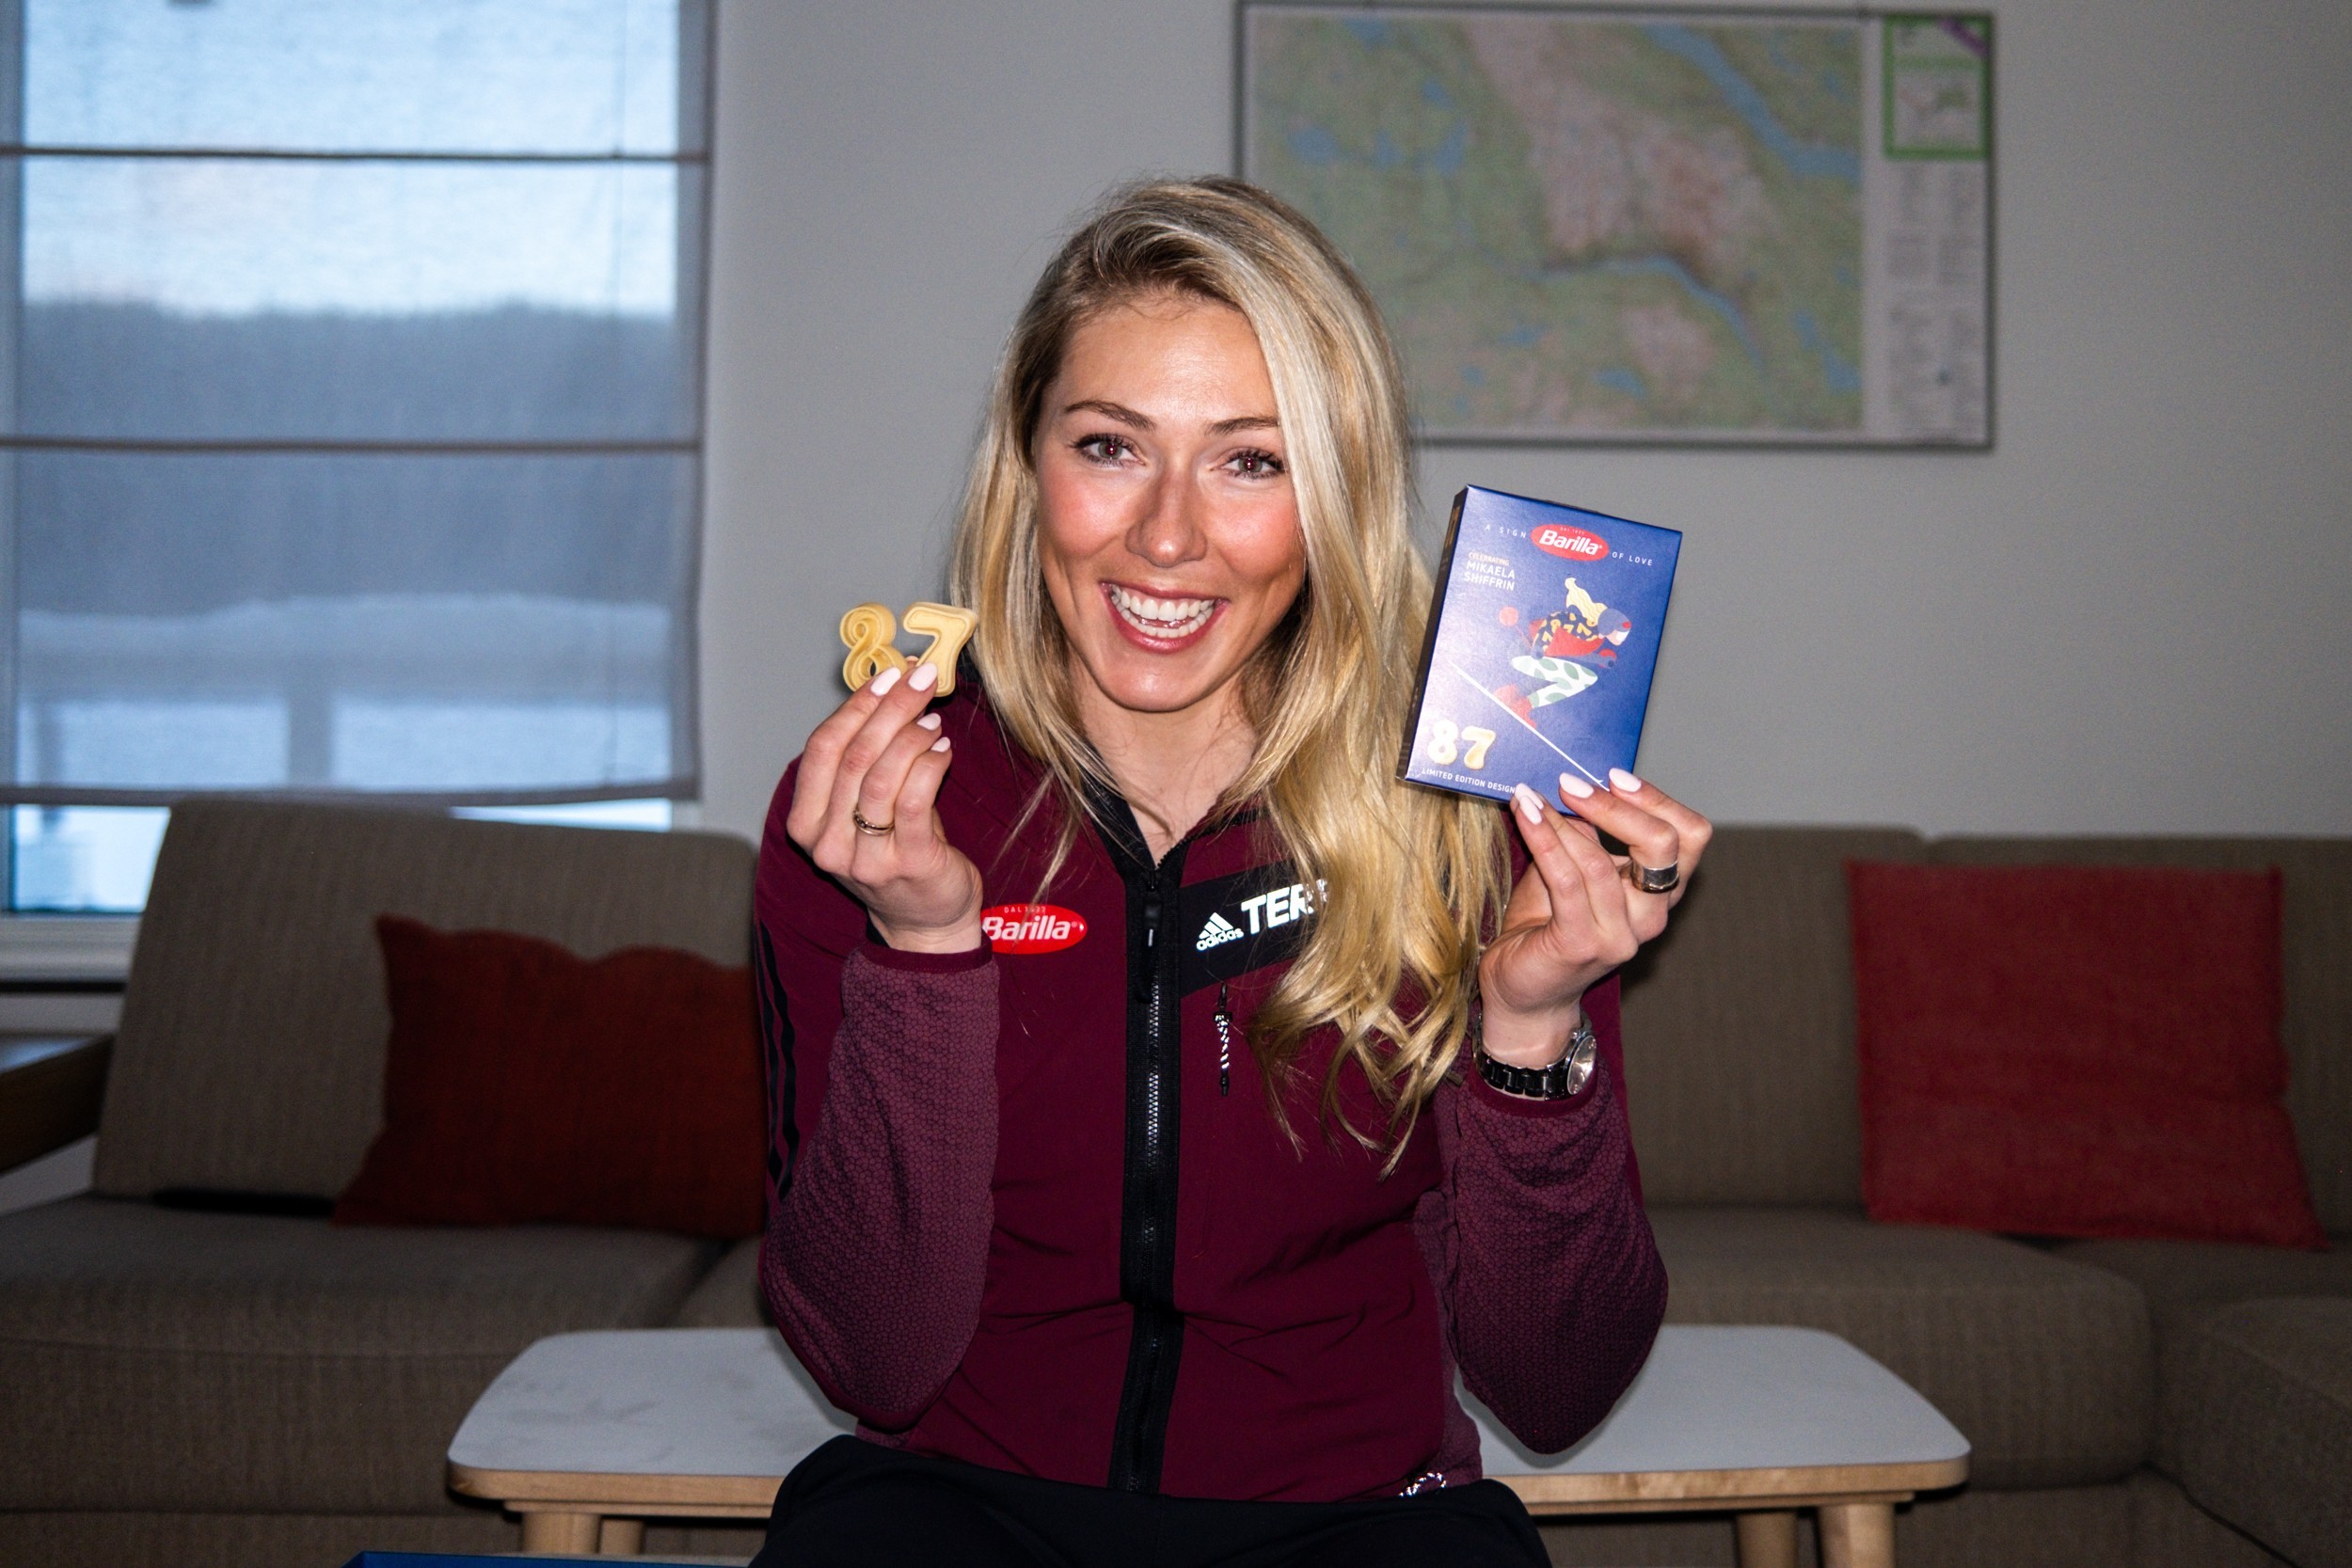 Barilla & Mikaela Shiffrin: Greatness starts with a great recipe - Pack No. 62